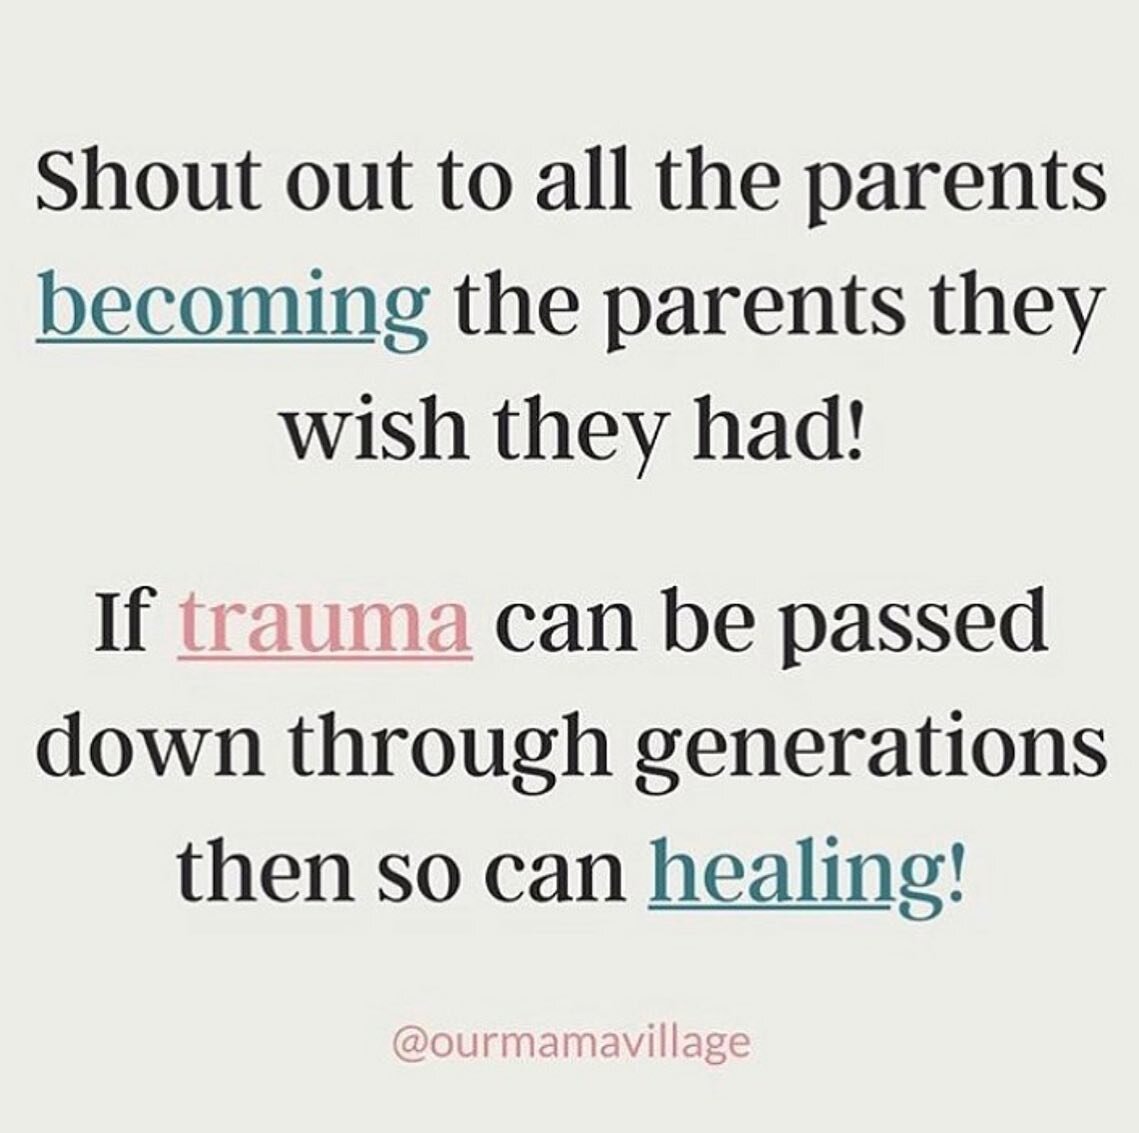 +It takes such courage to break the cycle and healing is possible+